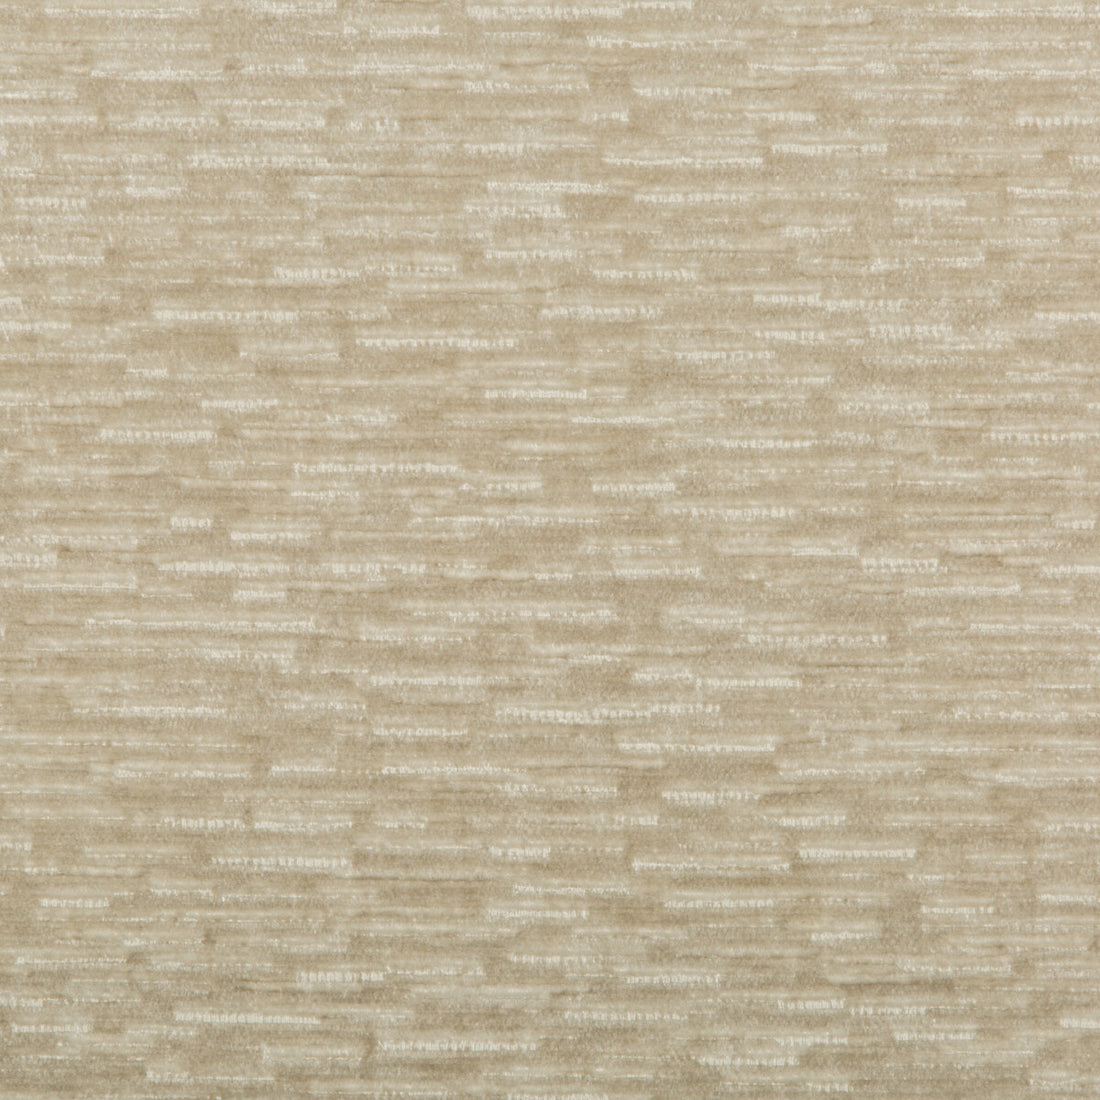 Kravet Smart fabric in 34731-111 color - pattern 34731.111.0 - by Kravet Smart in the Performance collection